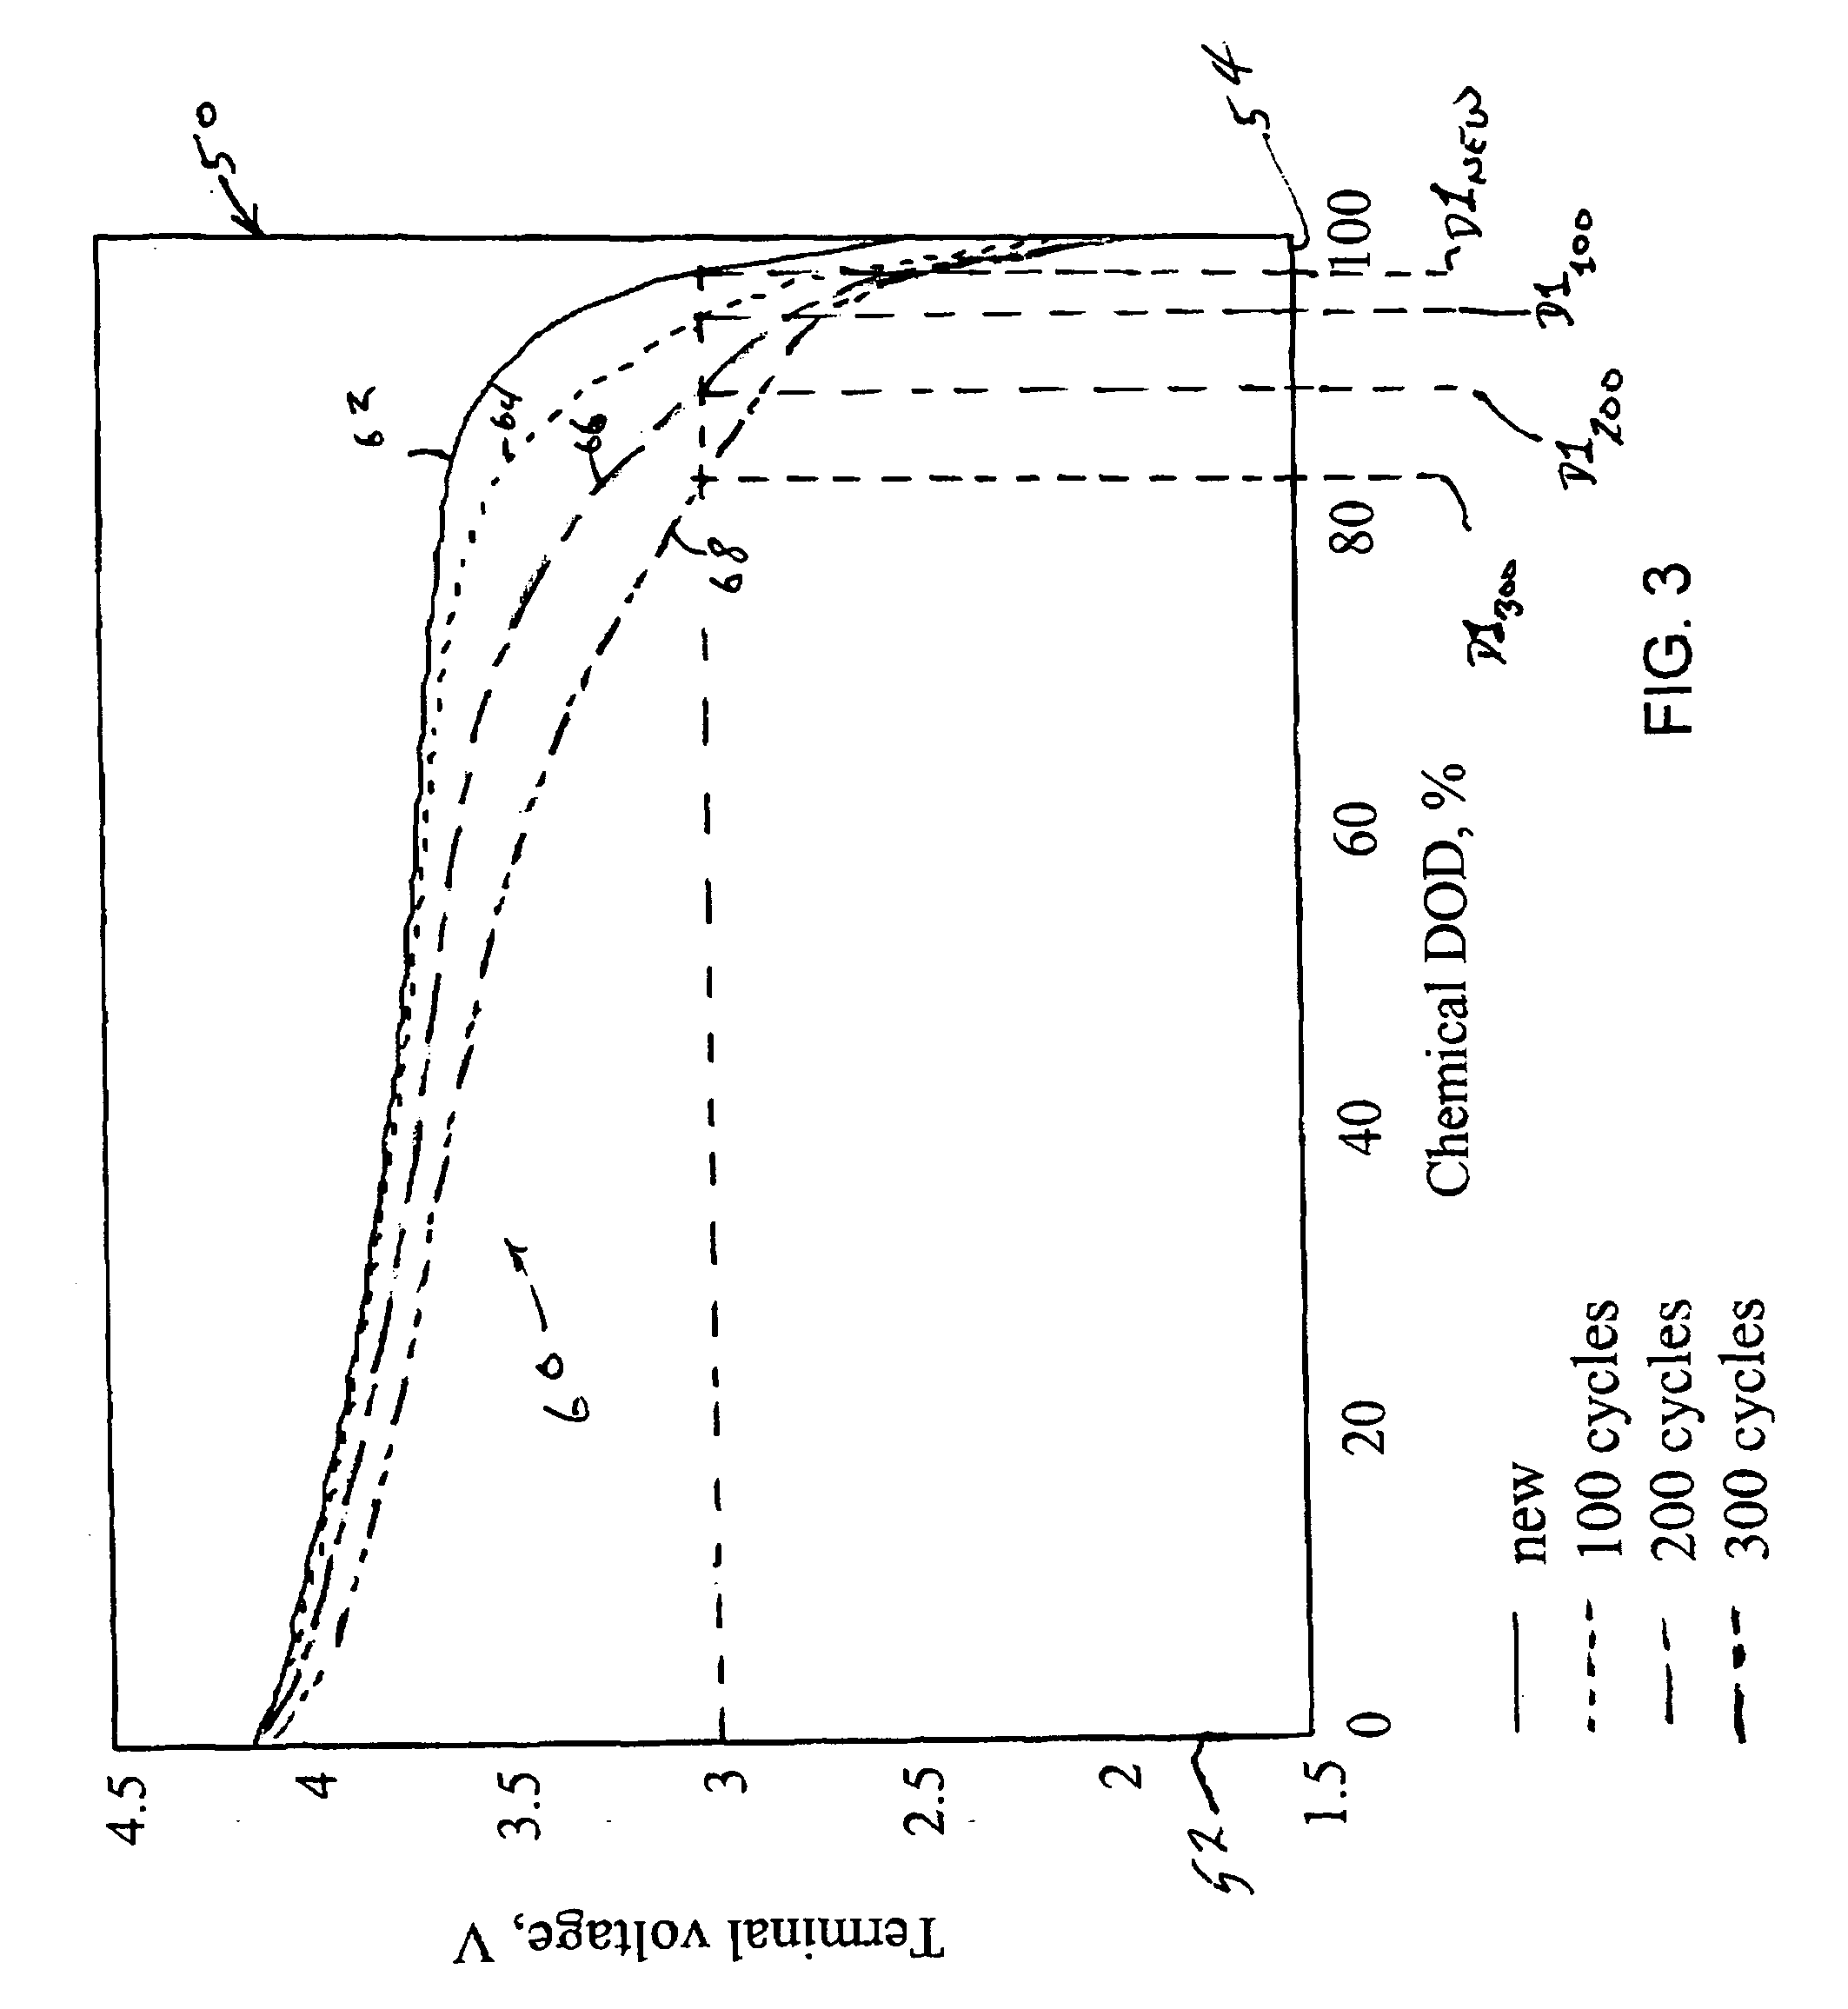 Method and apparatus for operating a battery to avoid damage and maximize use of battery capacity